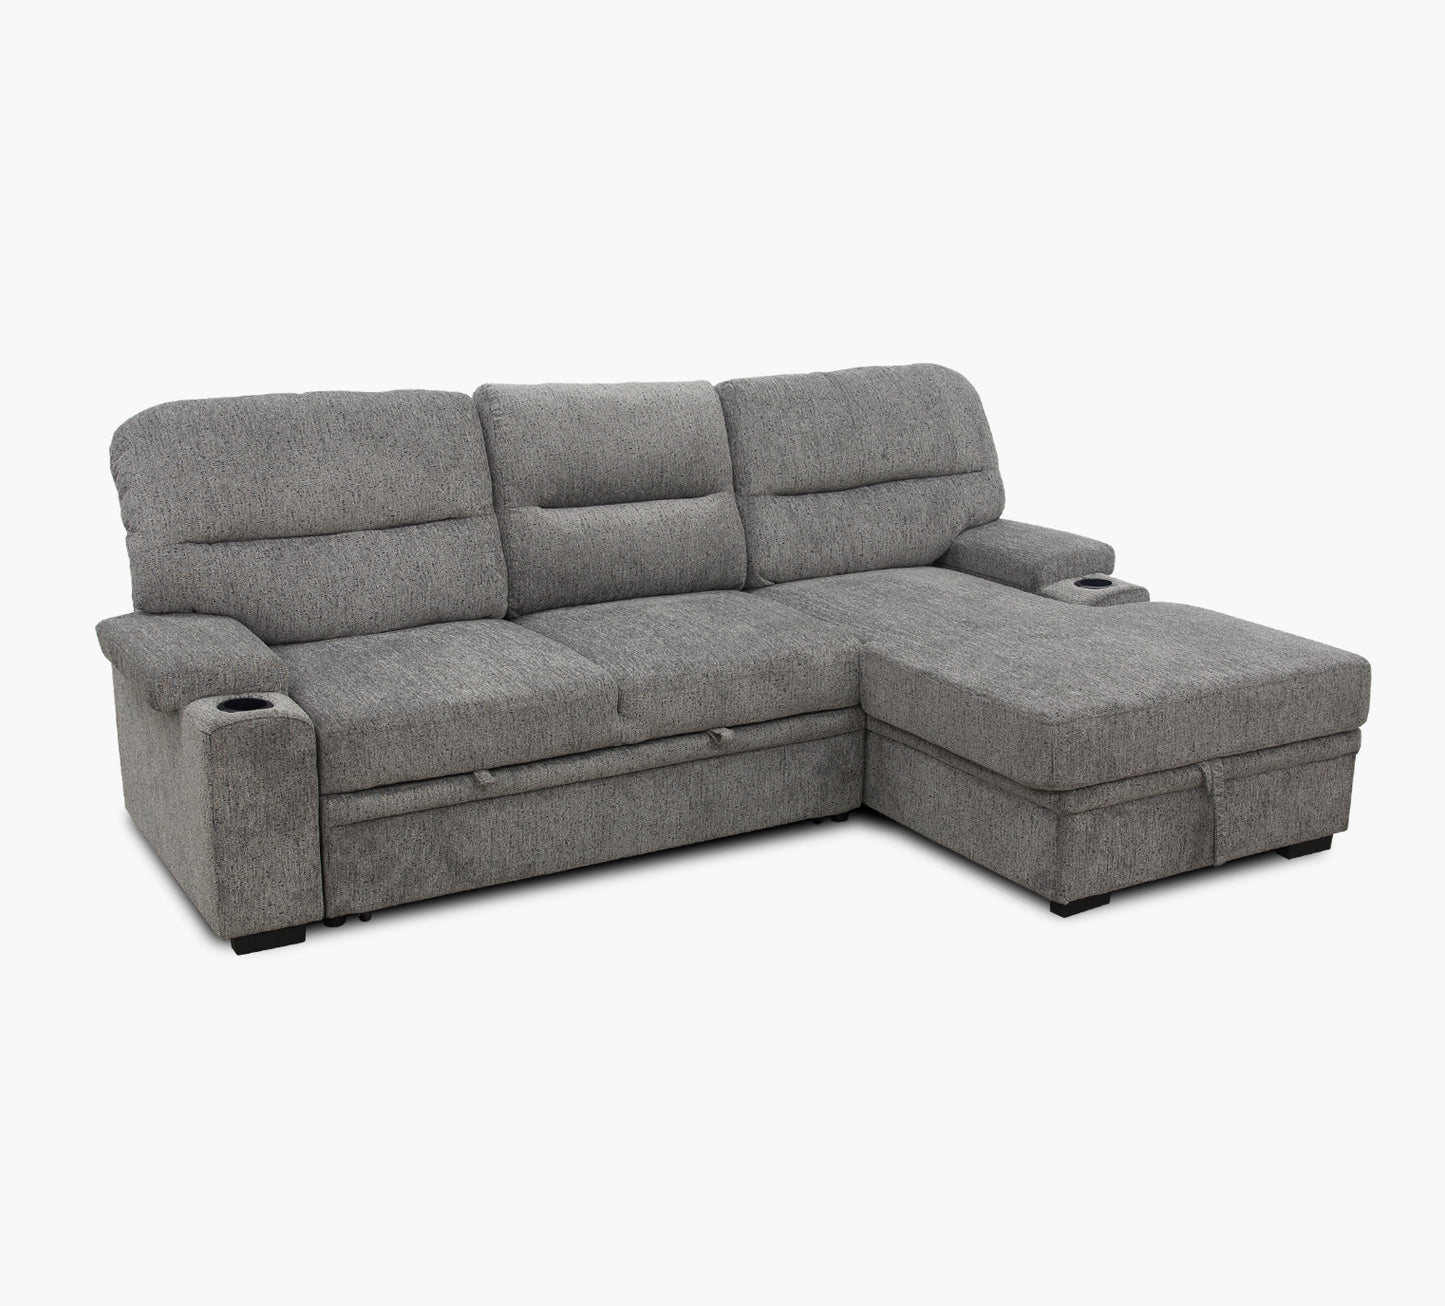 Cyril 2 Piece Sleeper Sectional